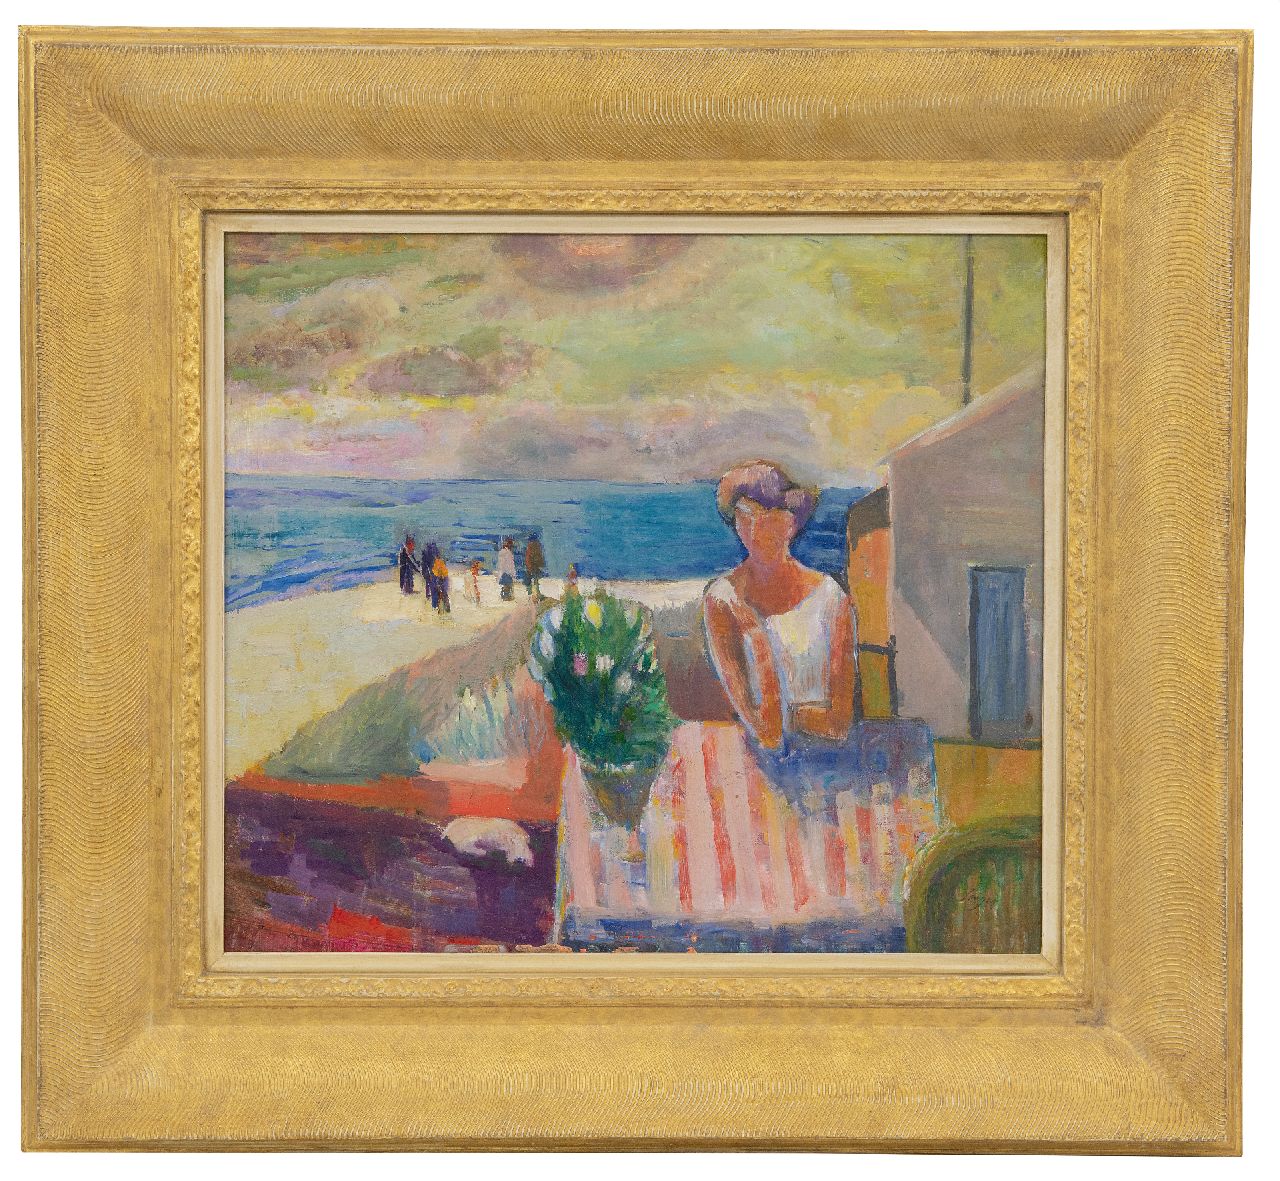 Serger F.B.  | Frederick Bedrich Serger | Paintings offered for sale | Terrace near the sea, oil on board 39.6 x 44.6 cm, signed l.r.